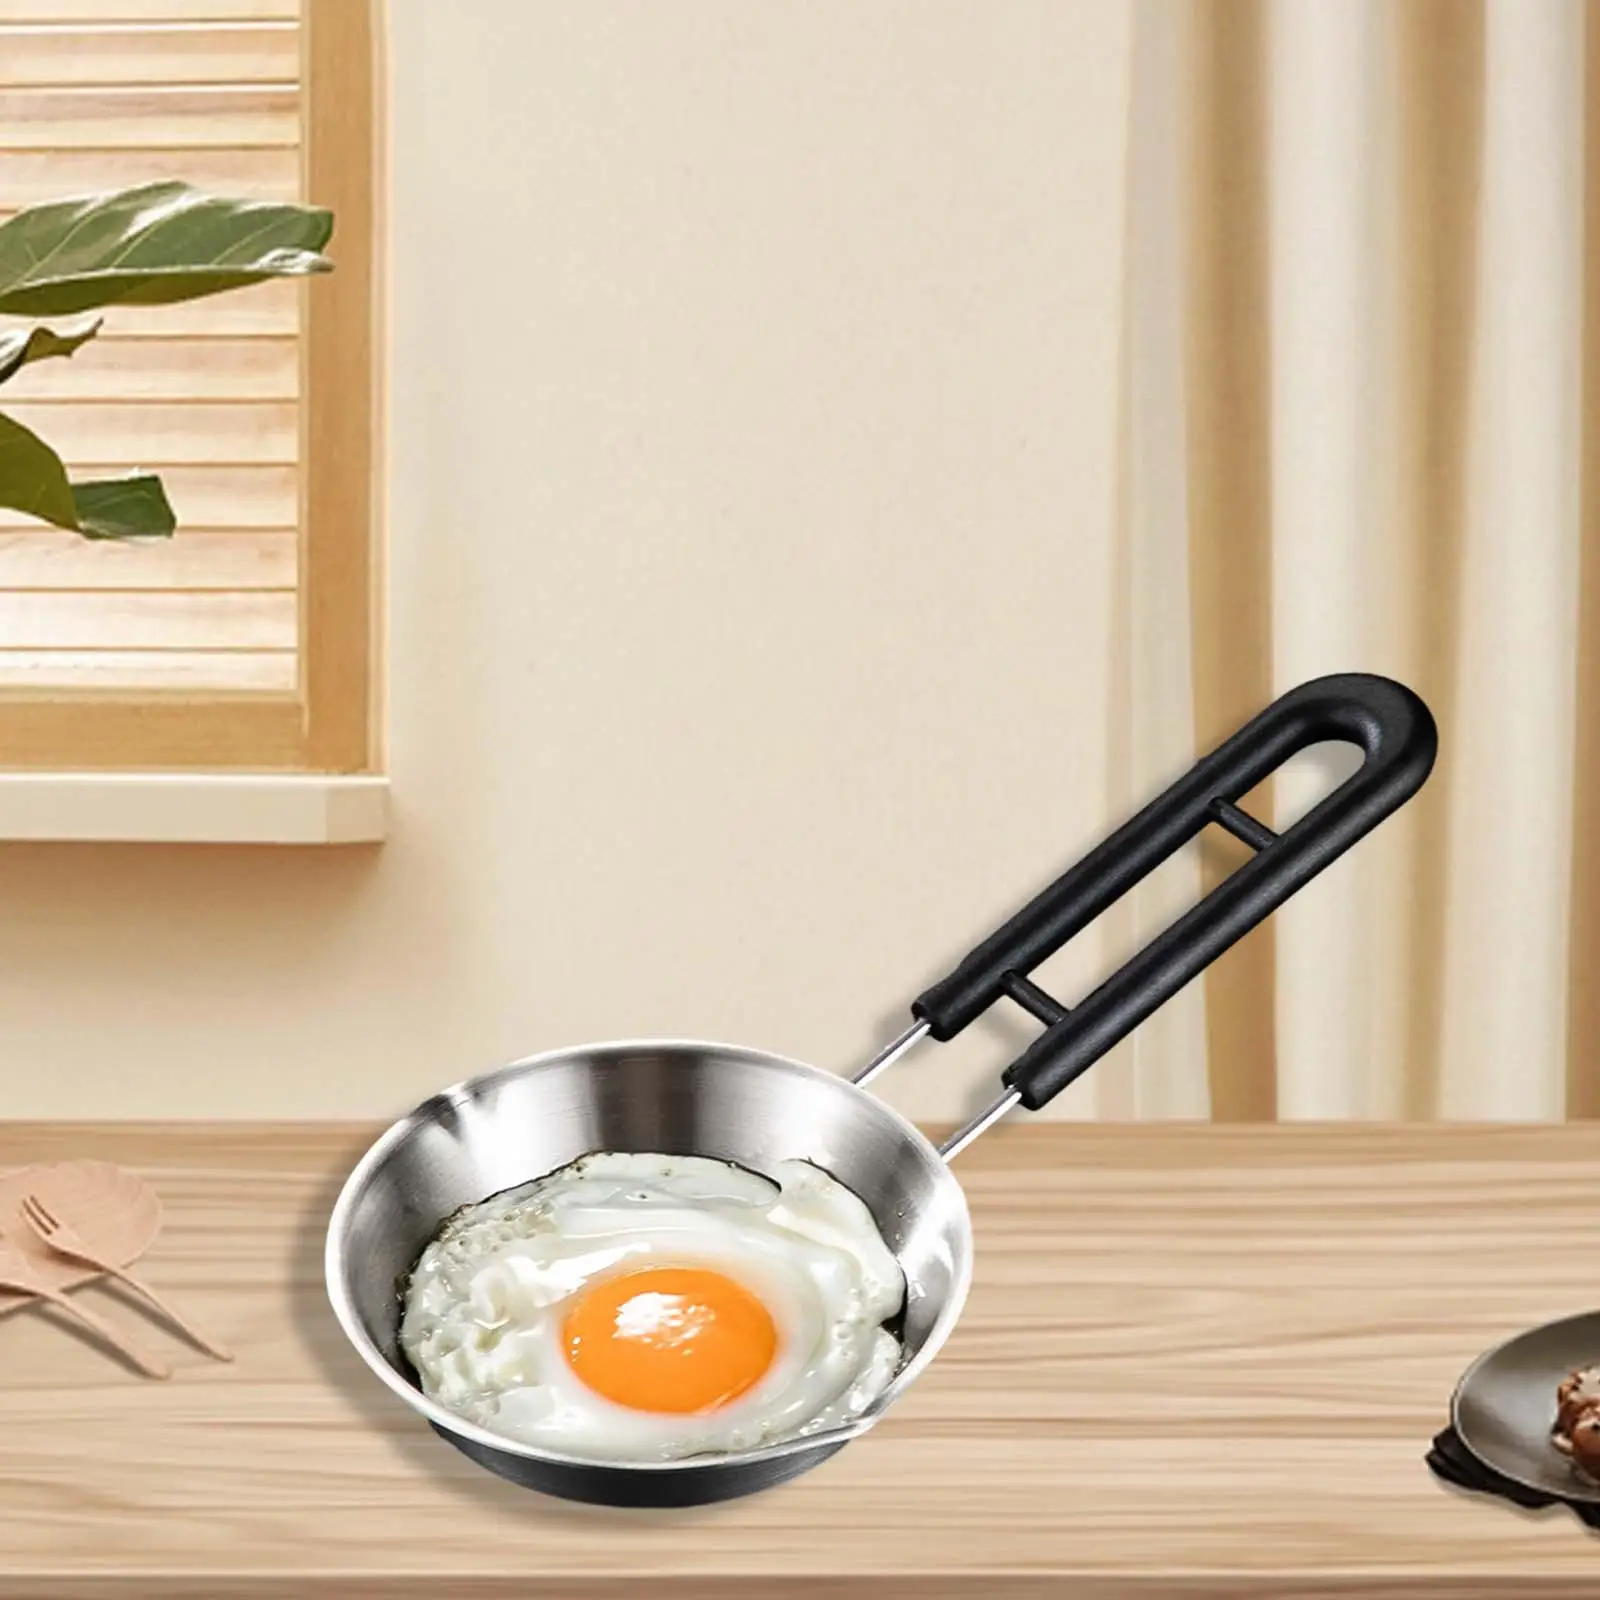 Mini Fry Pan Kitchen Cookware Melting Butter with Stay Handle Cooking Wok for Kitchen Gas Stove Induction Cooker Outdoor Camping